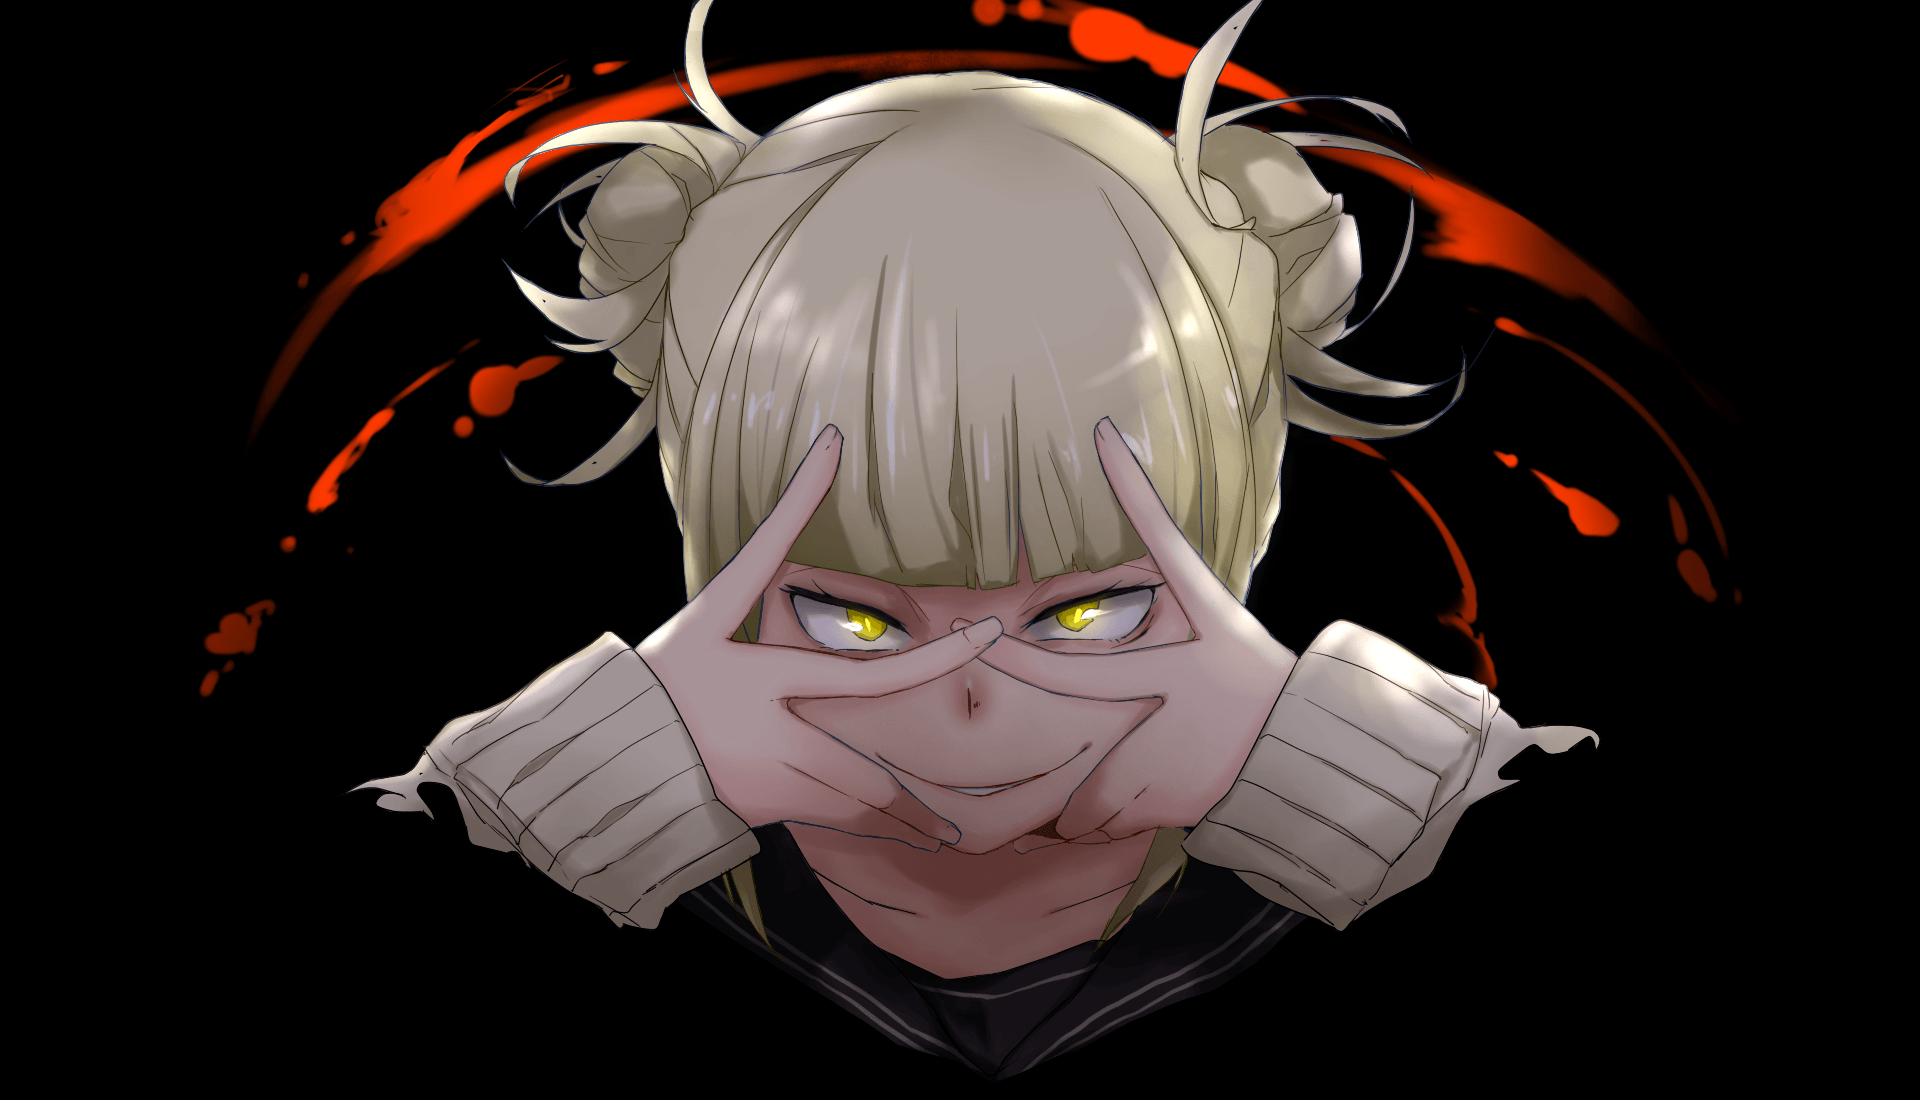 Himiko Toga Aesthetic Wallpapers Wallpaper Cave 5980